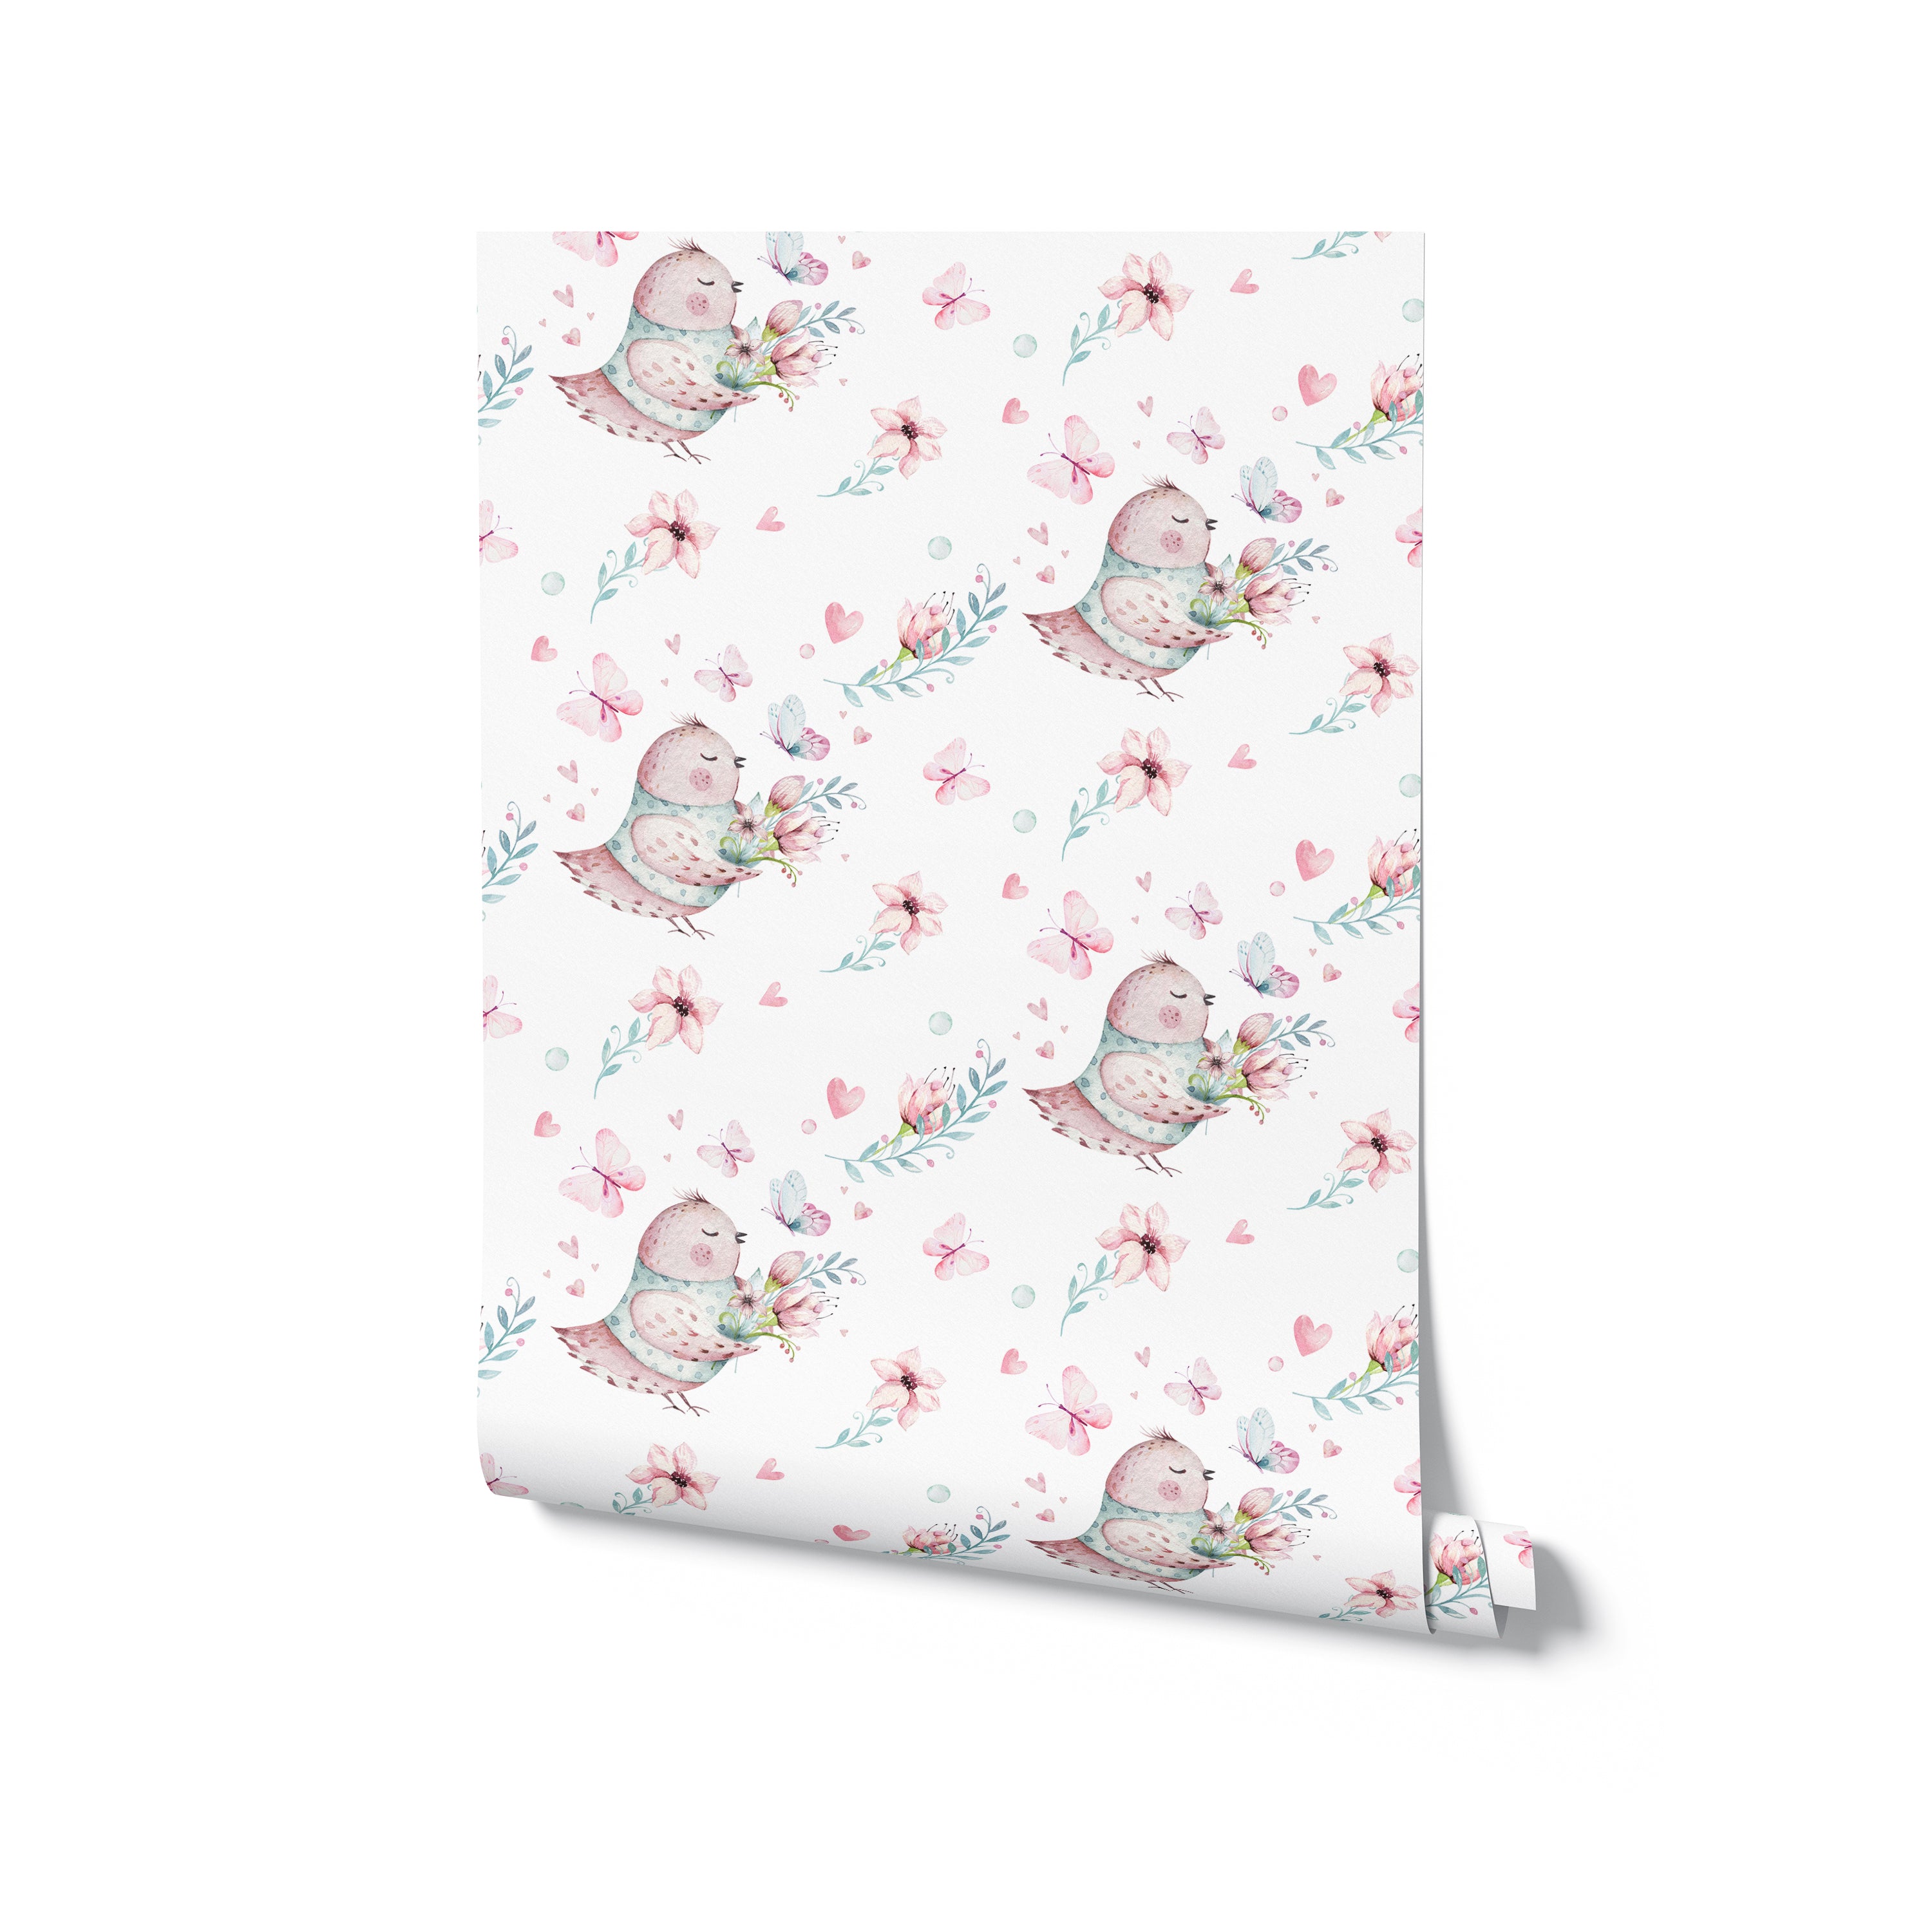 A roll of 'Fairy and Flowers Wallpaper IV', unfurled to show a charming pattern of whimsical birds with botanical wings, soft pink flowers, and light blue butterflies, set against a white background, ideal for adding a magical touch to any child's room